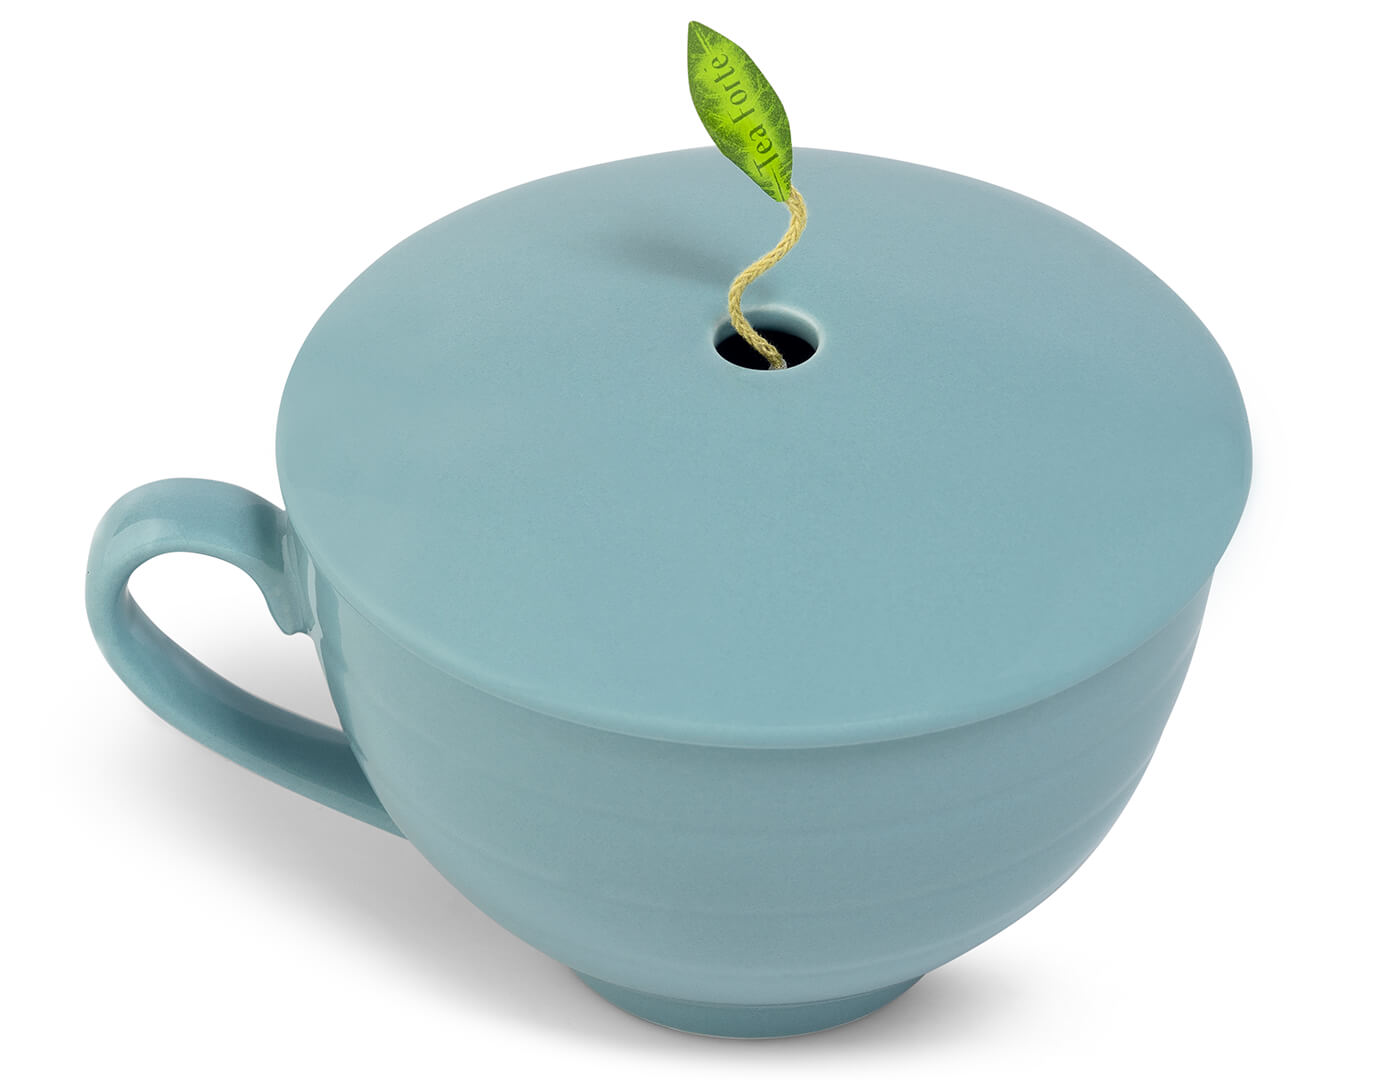 Wellbeing Café Cup in light blue, with cover on and infuser leaf peeking out of the hole in the cover top.